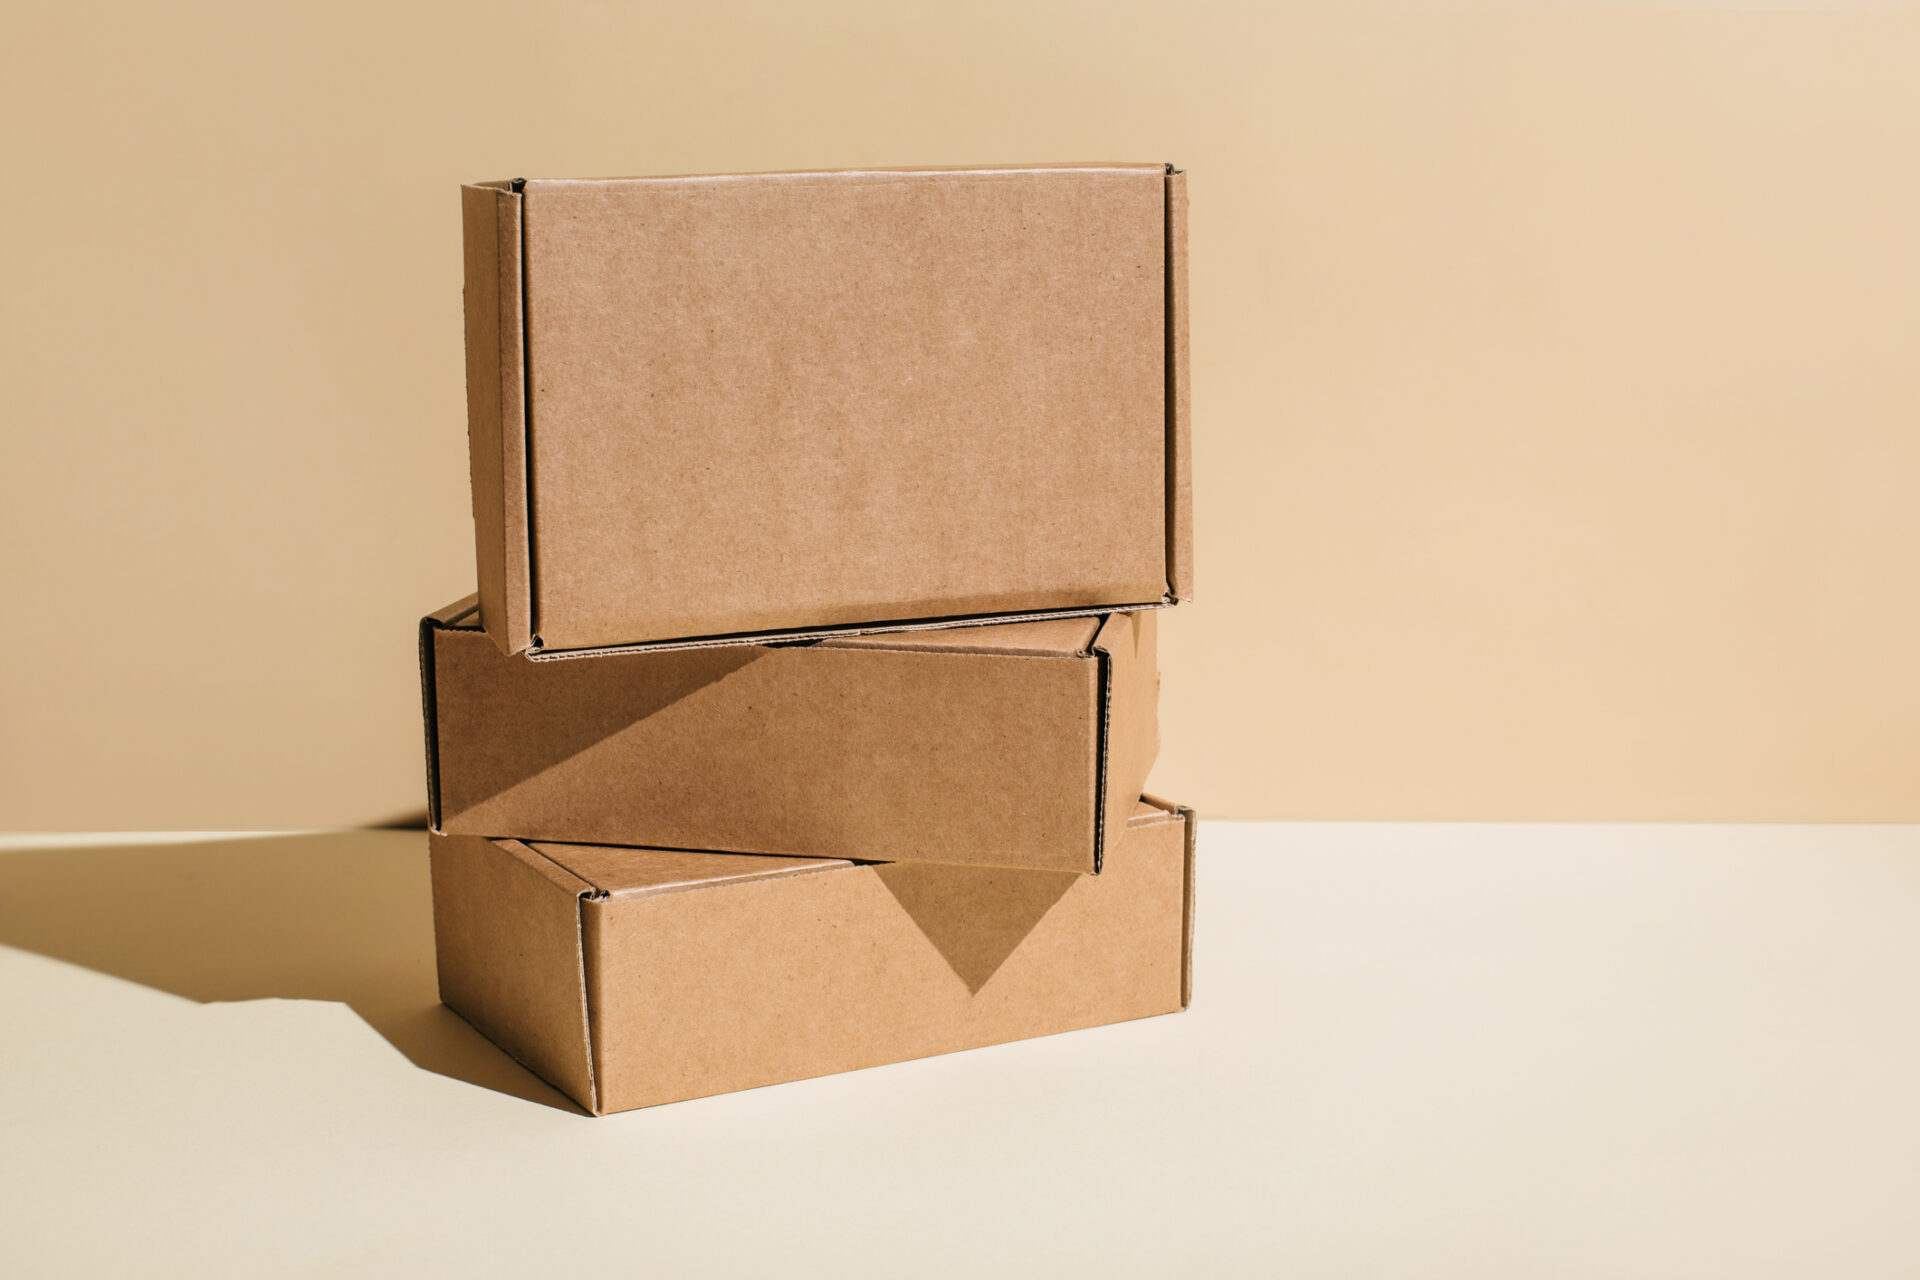 Brown cardboard boxes stacked on top of each other on a beige background, copy space